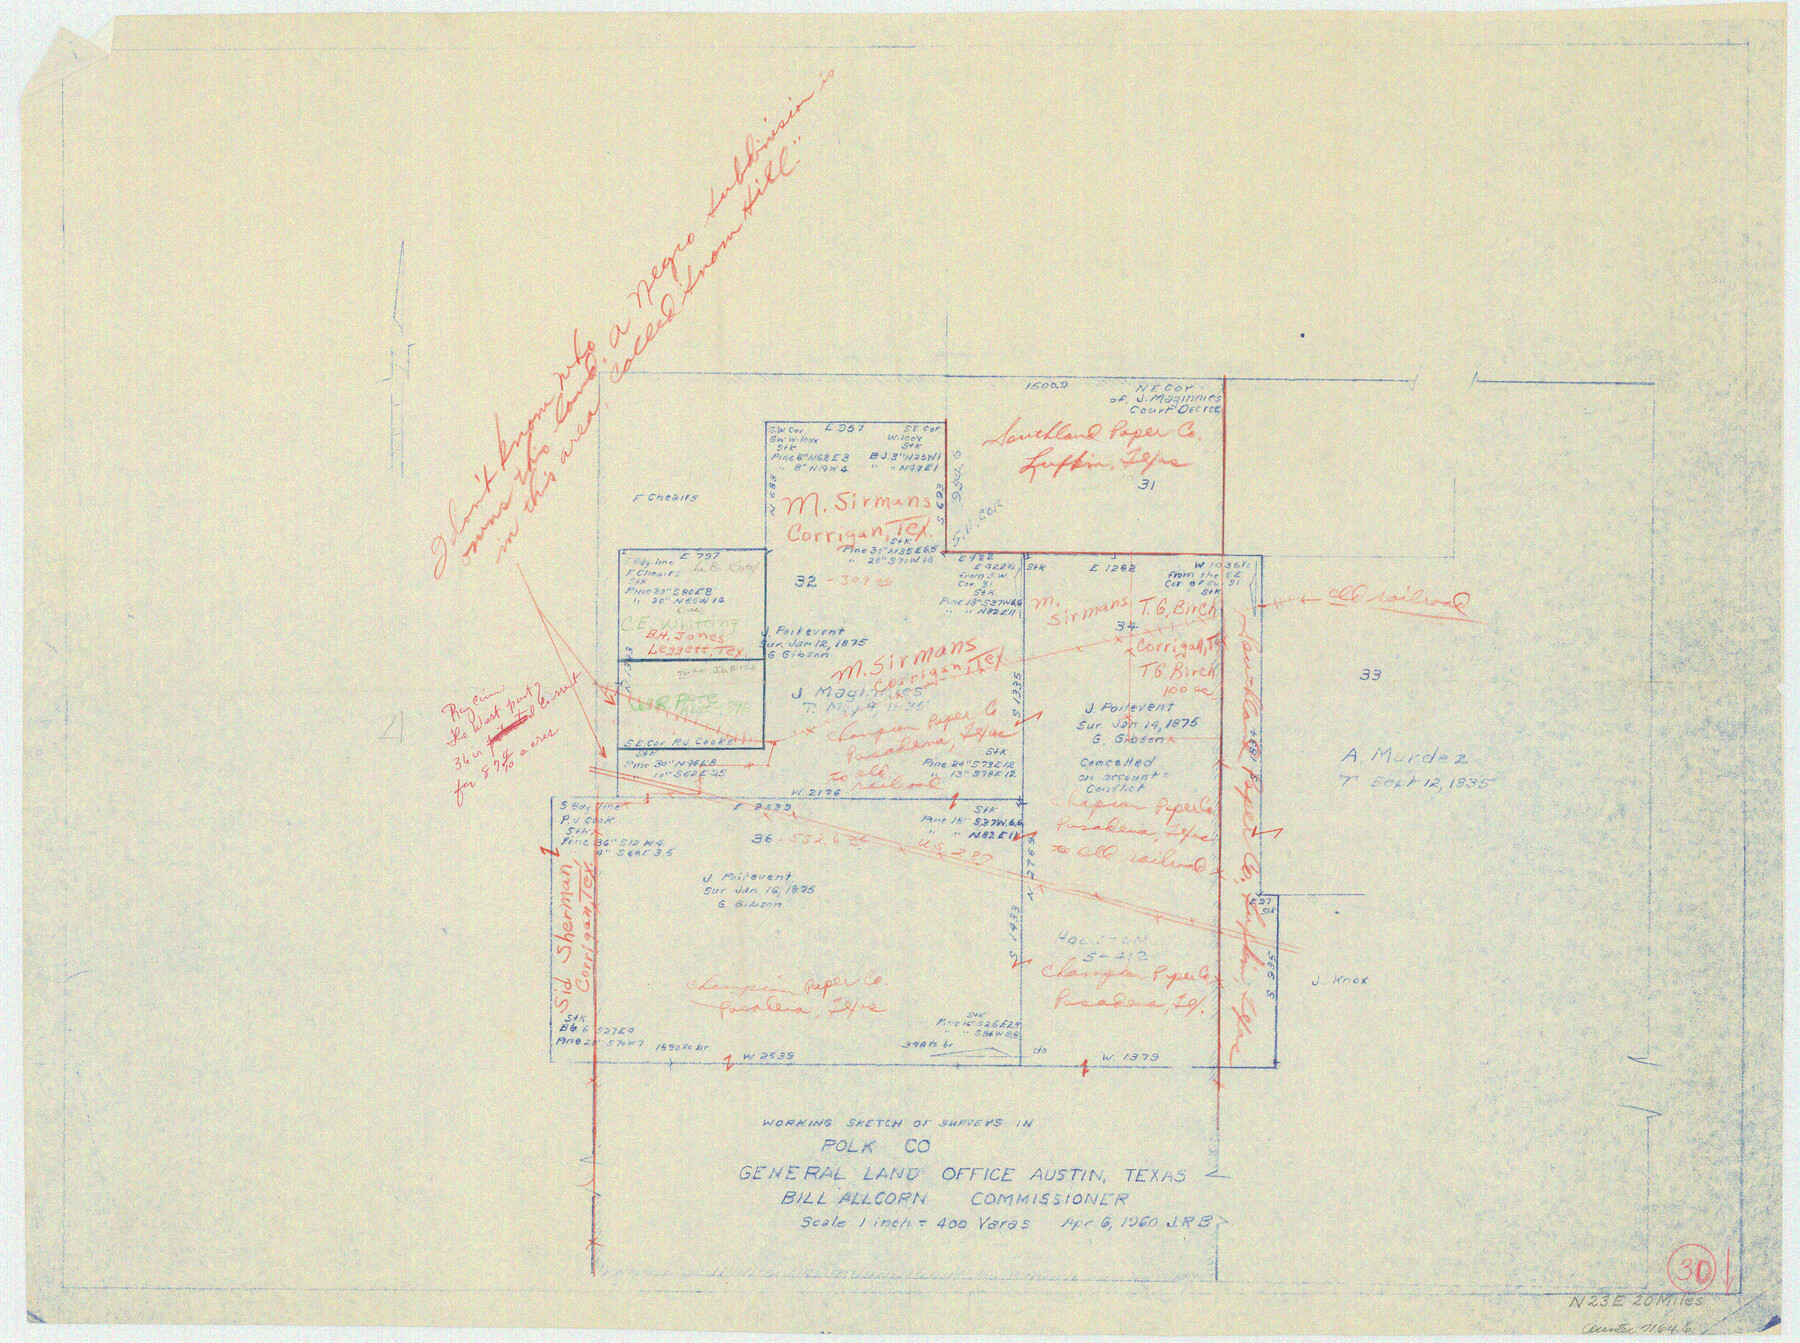 71646, Polk County Working Sketch 30, General Map Collection